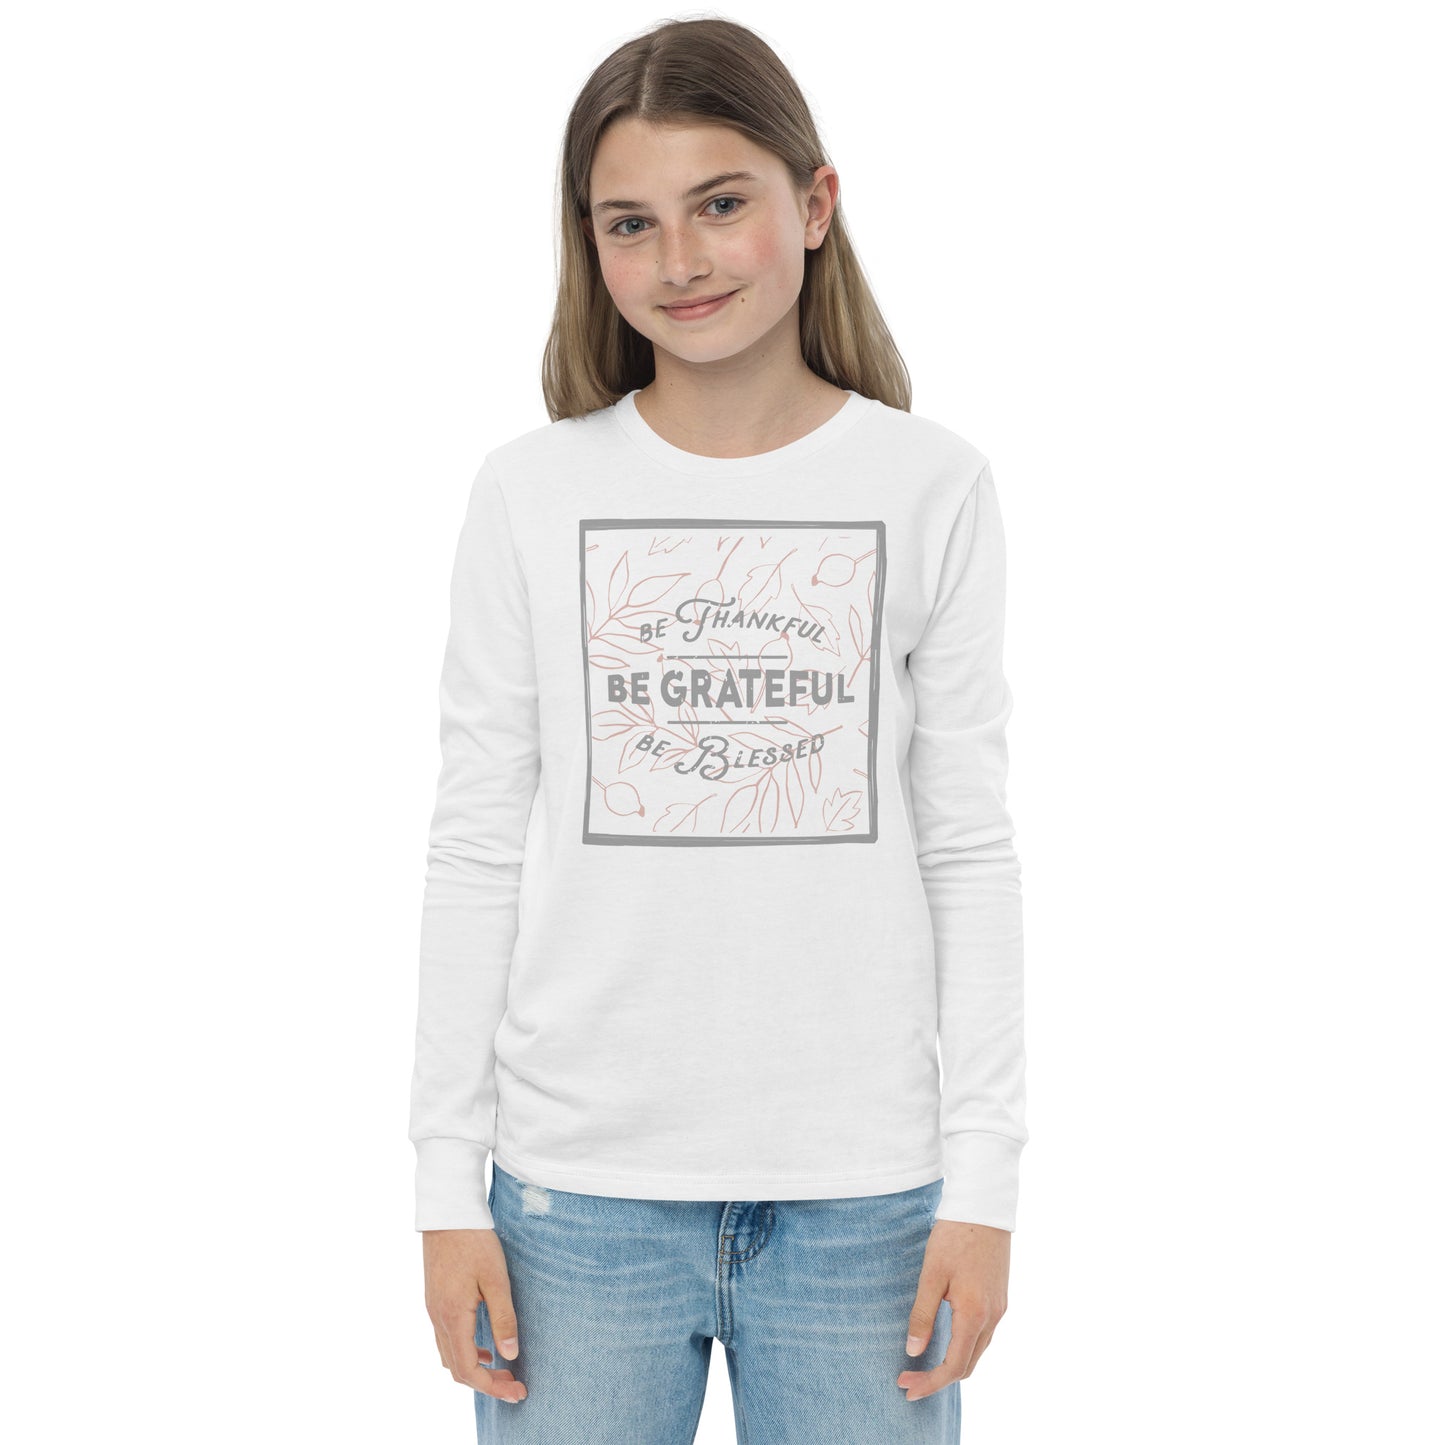 Be Thankful, Be Grateful, Be Blessed - Youth long sleeve tee